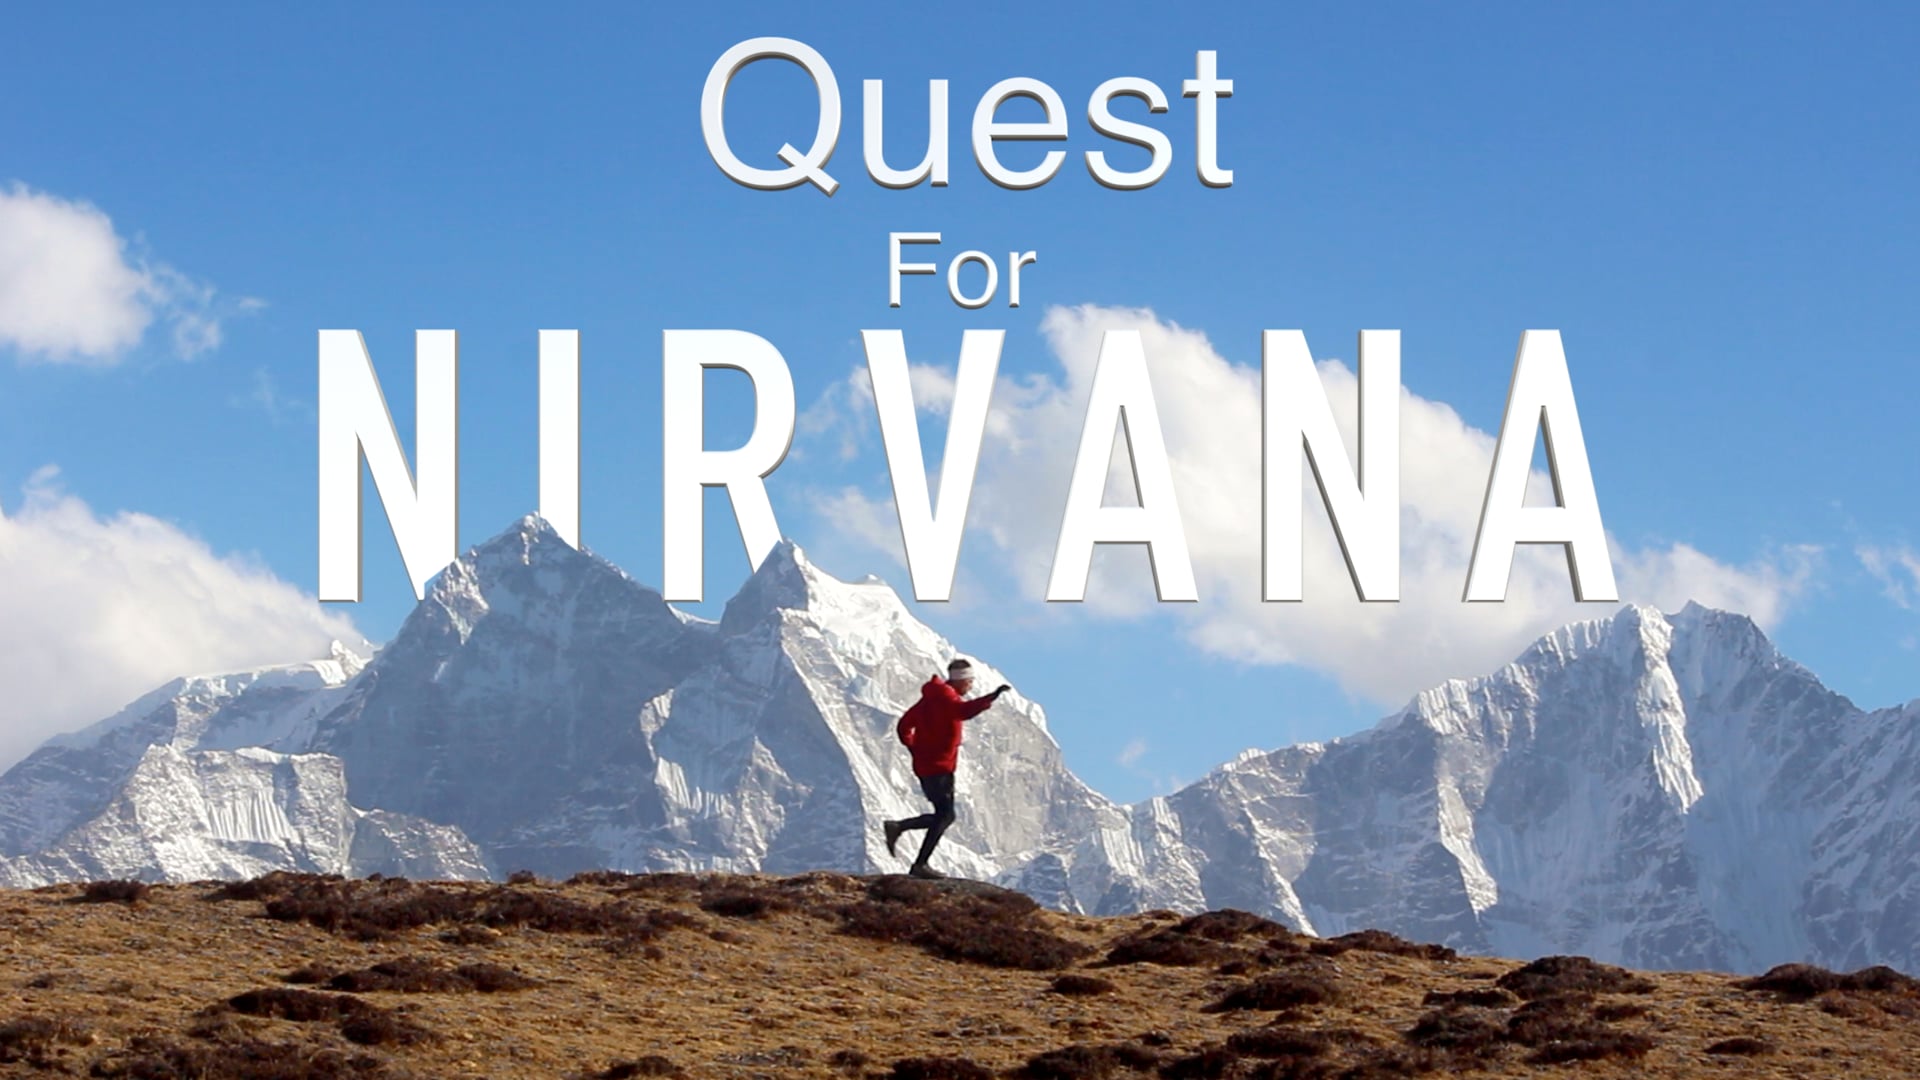 Quest for Nirvana